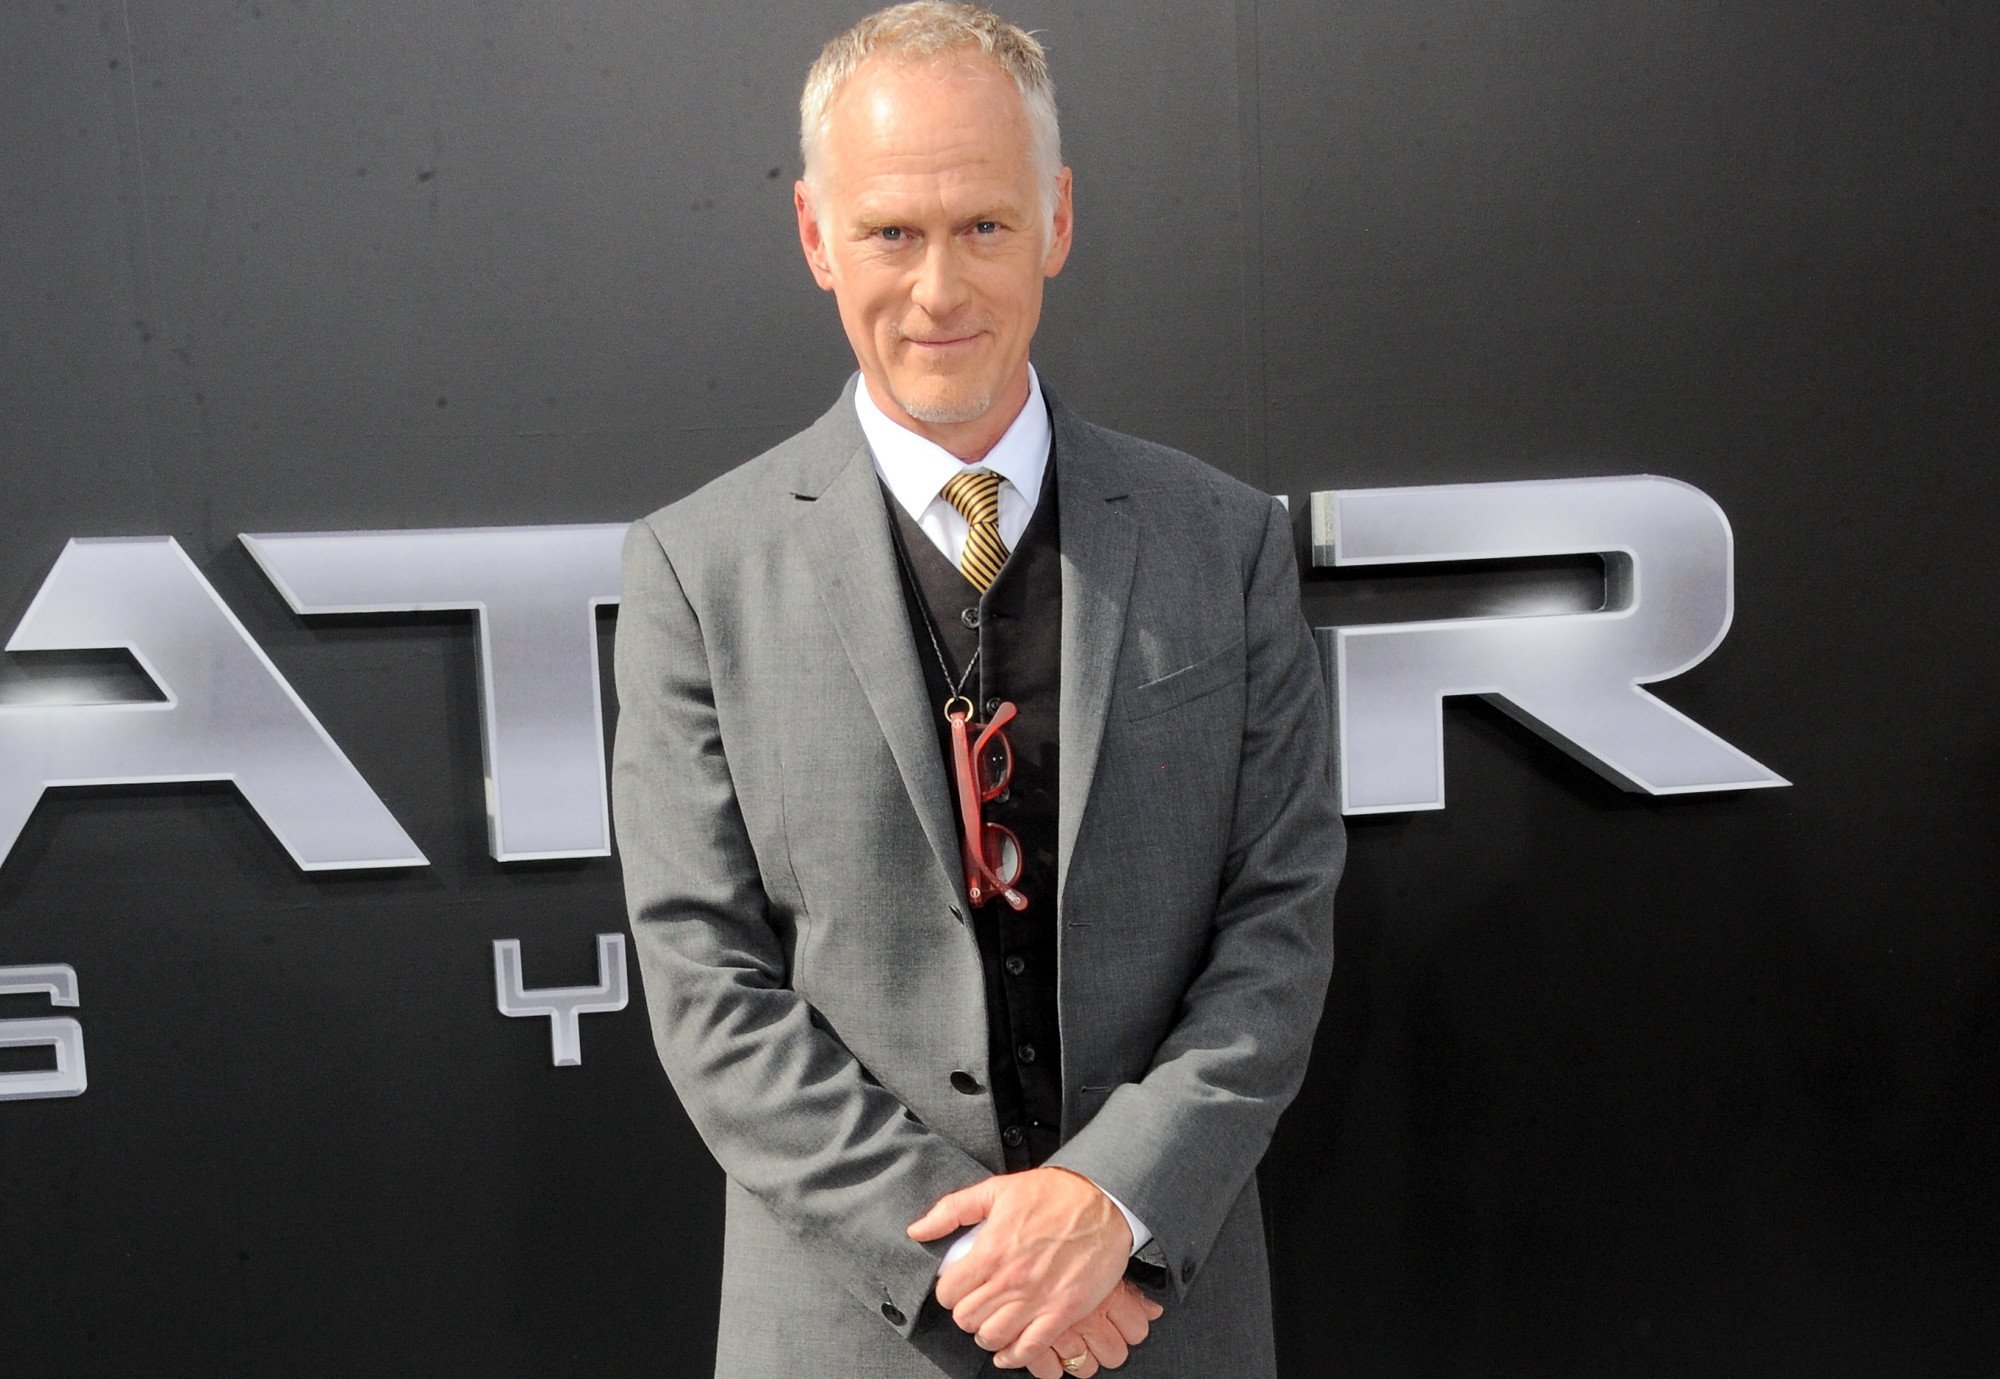 Director Alan Taylor, who is joining 'House of the Dragon' for season 2. He's wearing a white shirt, yellow tie, and gray suit in the photo. A pair of red glasses hangs around his neck.